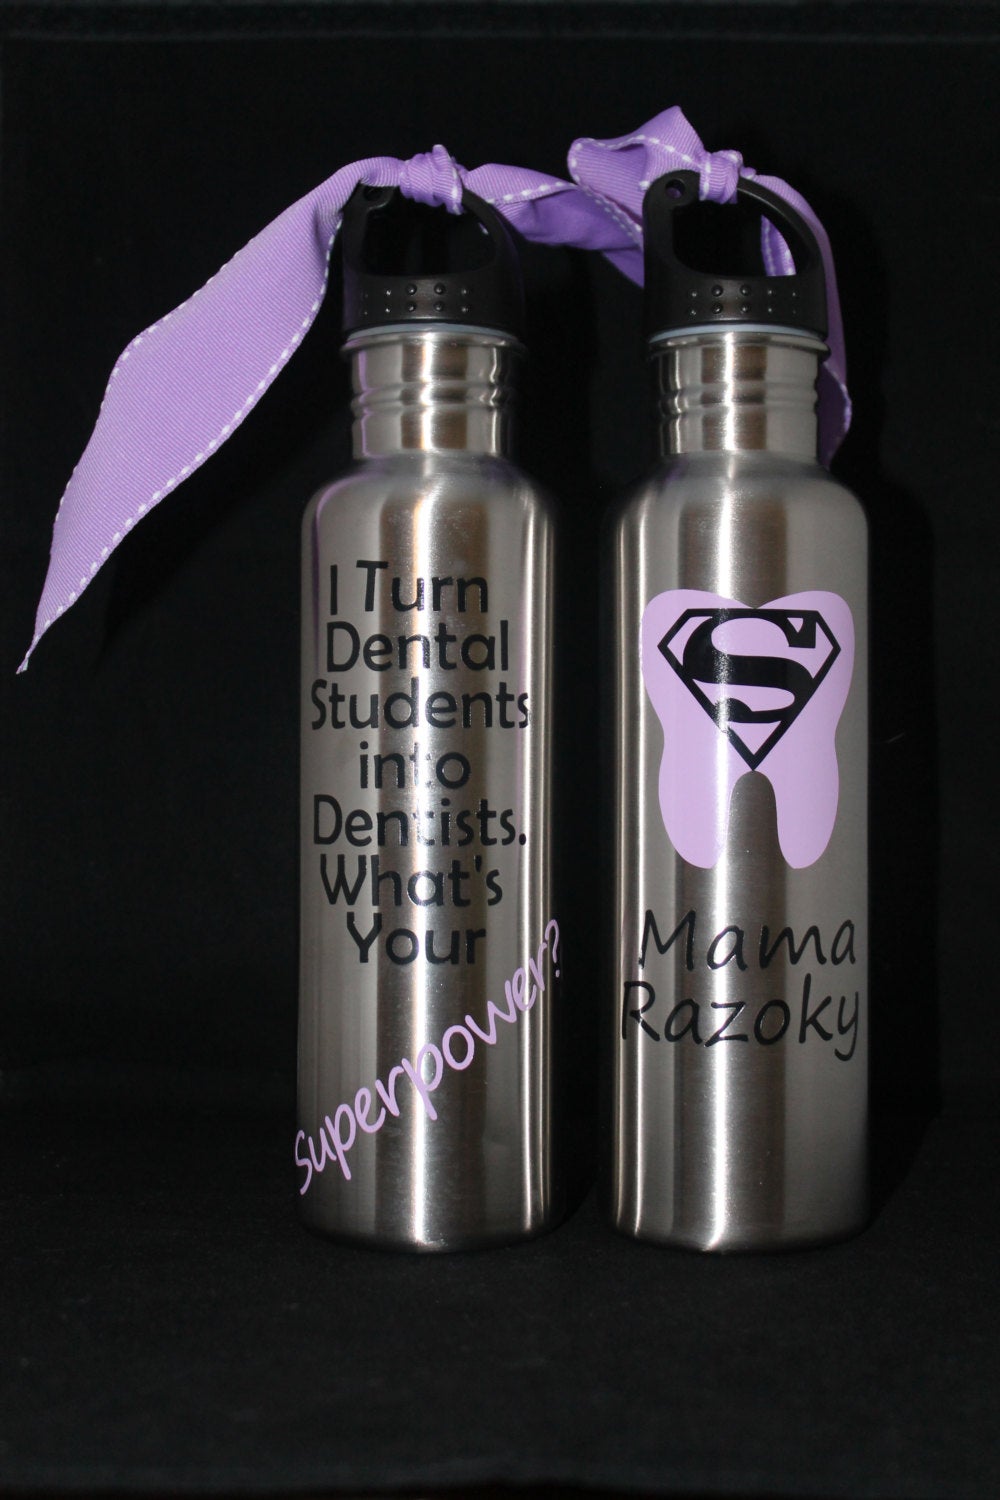 I Turn Dental Students into Dentists" 25 oz. Stainless Steel Water Bottle - Thank You Gift - Staff